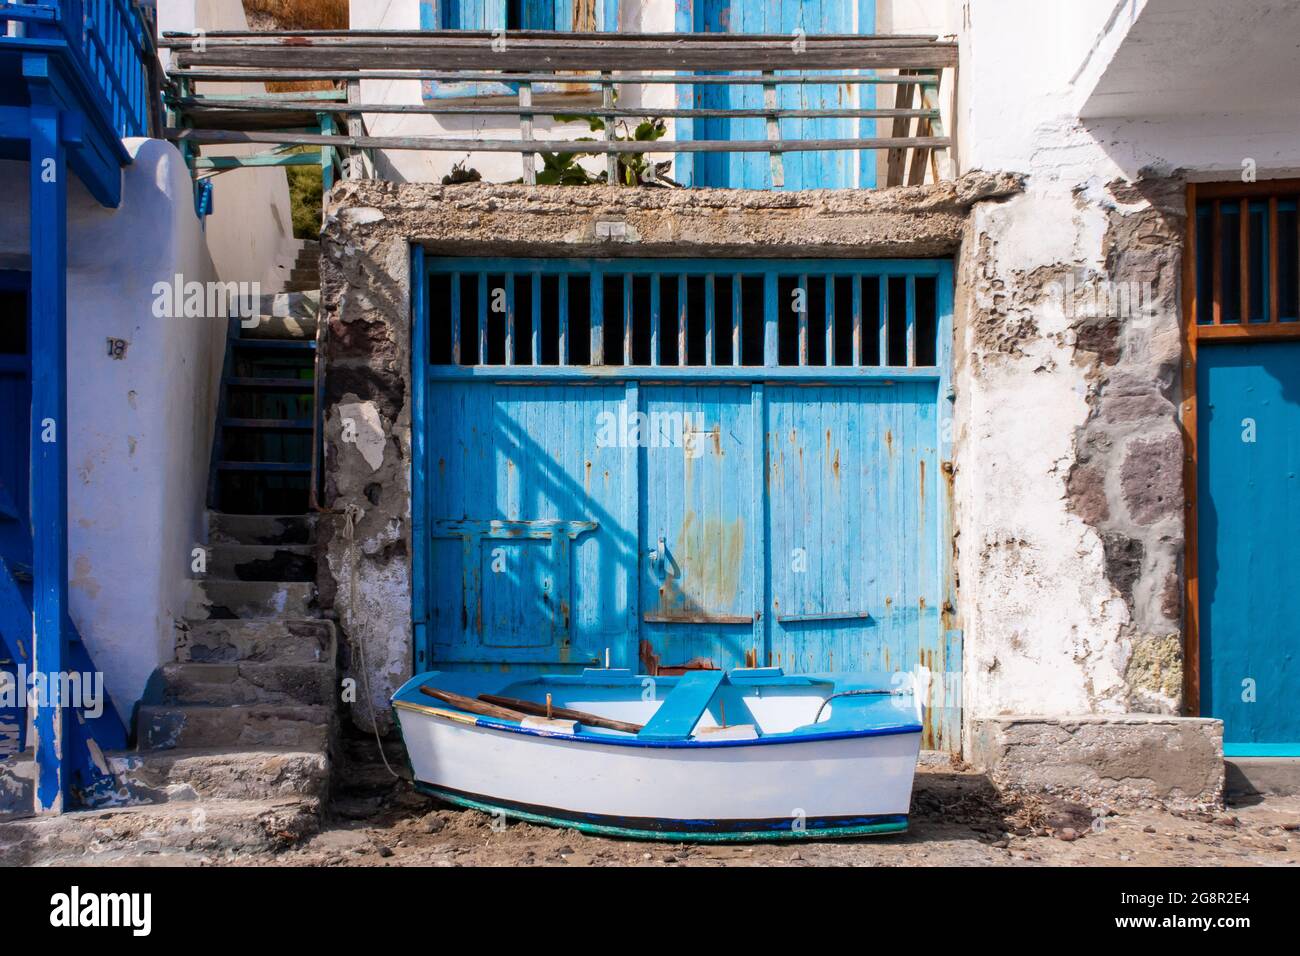 Vivid blue garage doors with a small wooden boat in front in Greek Klima fishermen village - the most colorful village in Greece. Stock Photo